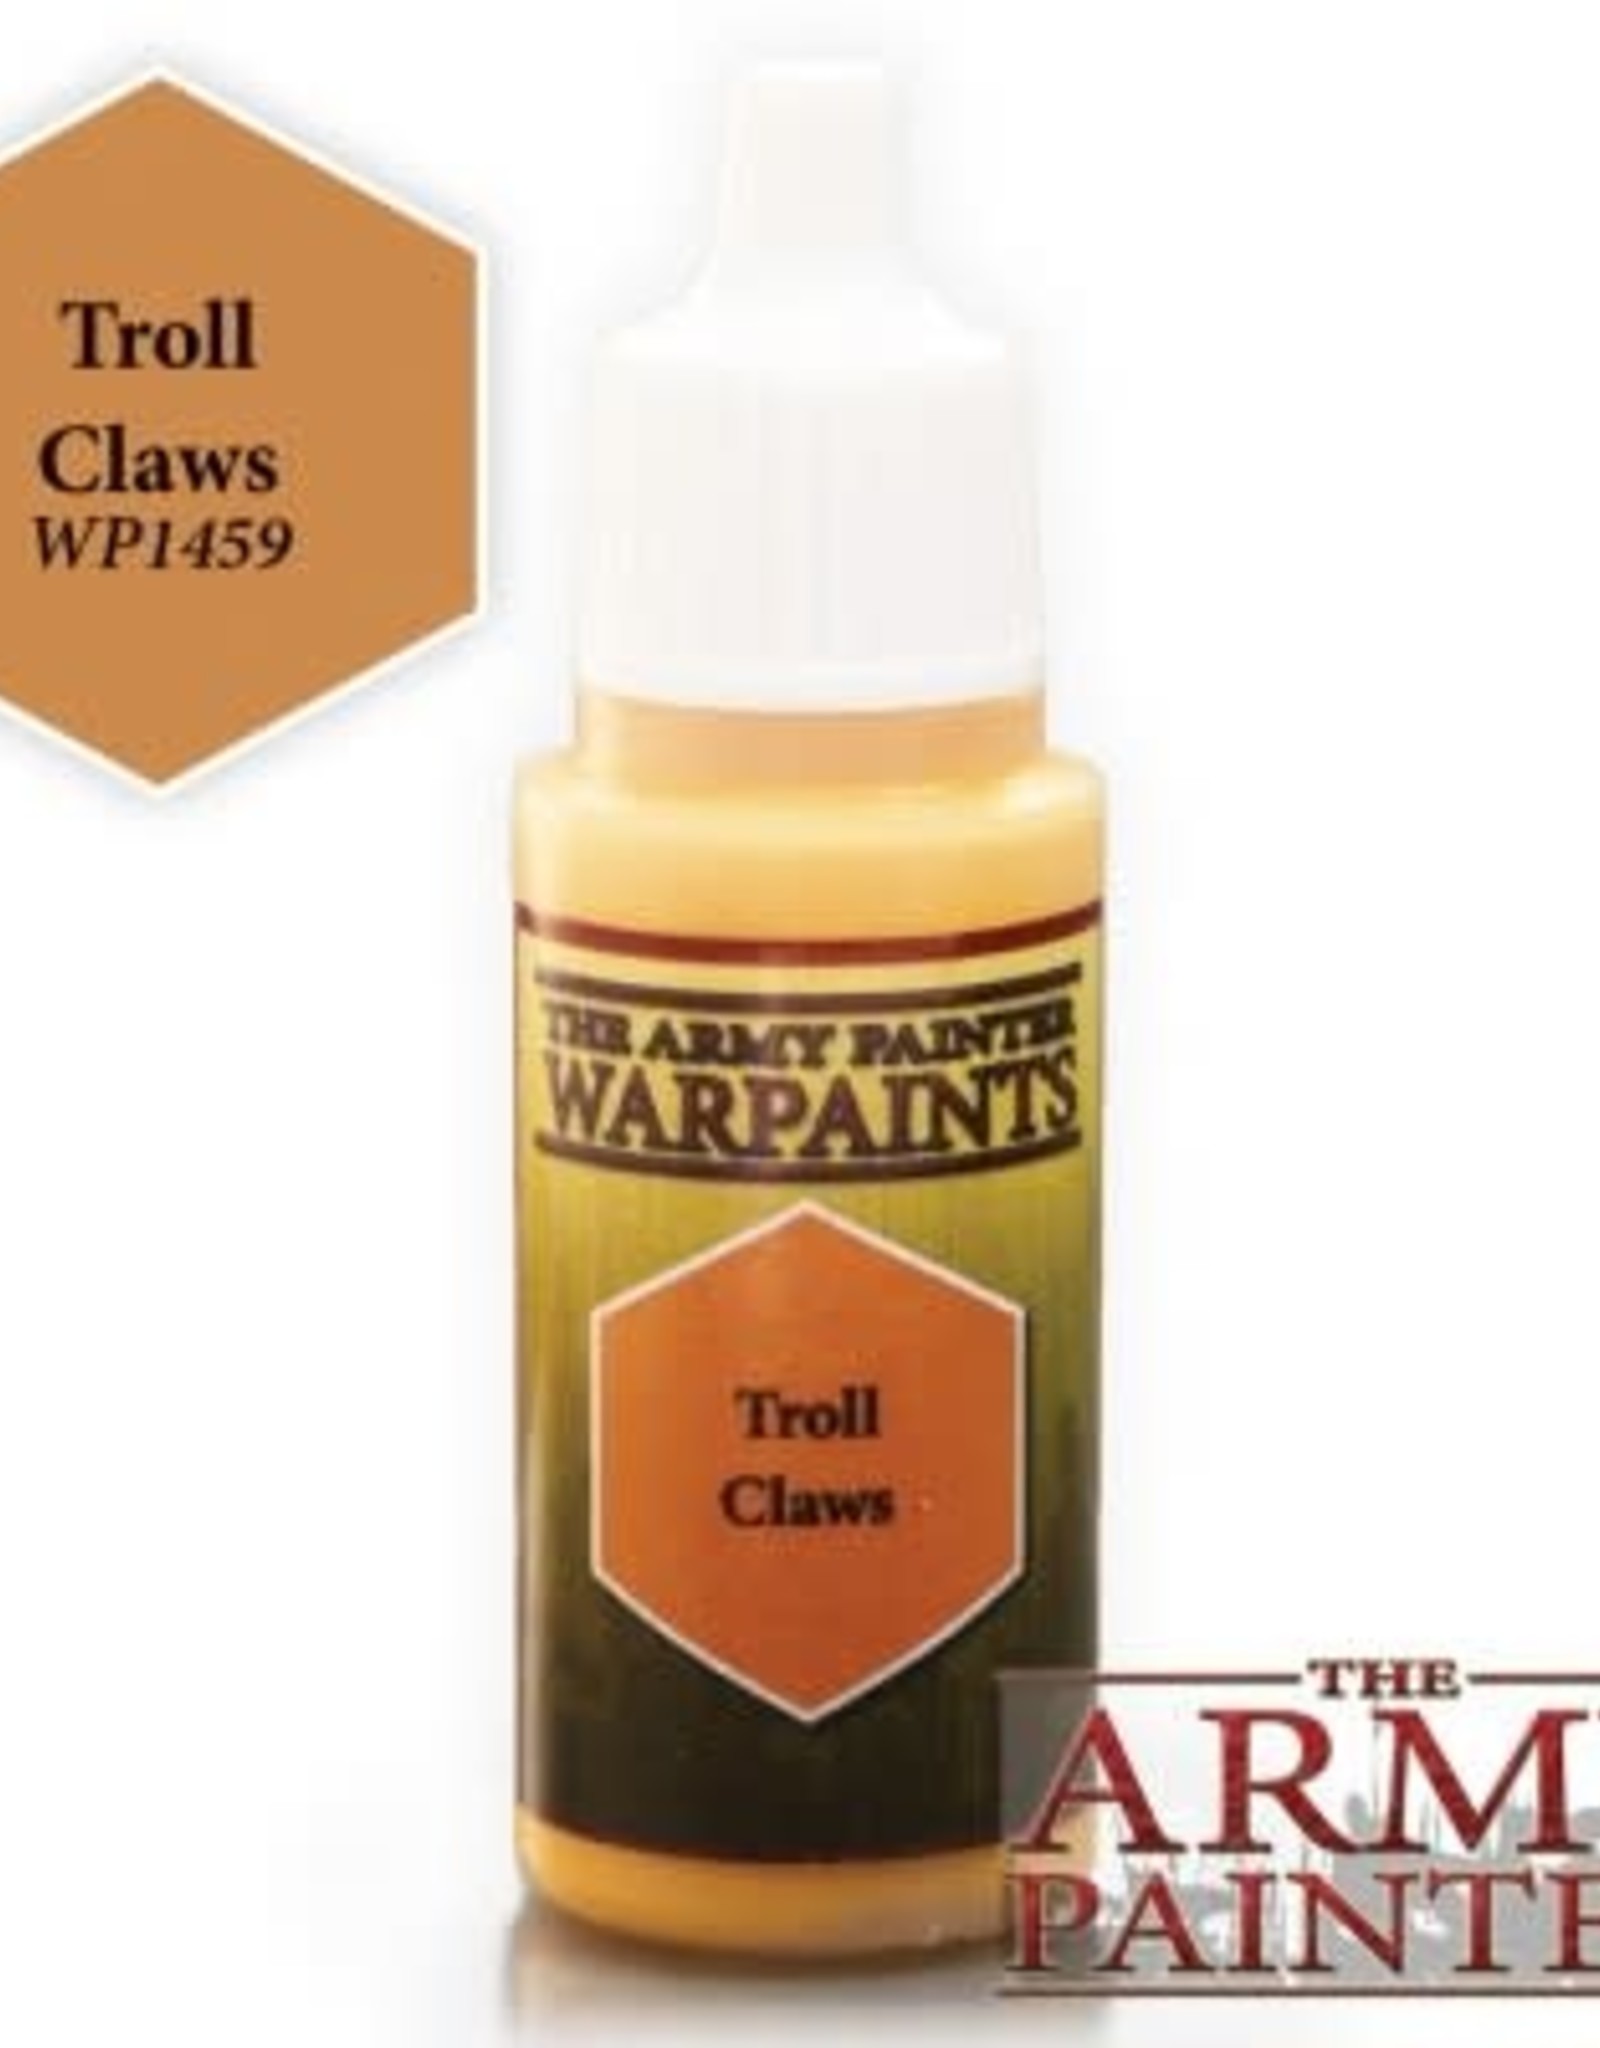 The Army Painter TAP Warpaint Troll Claws